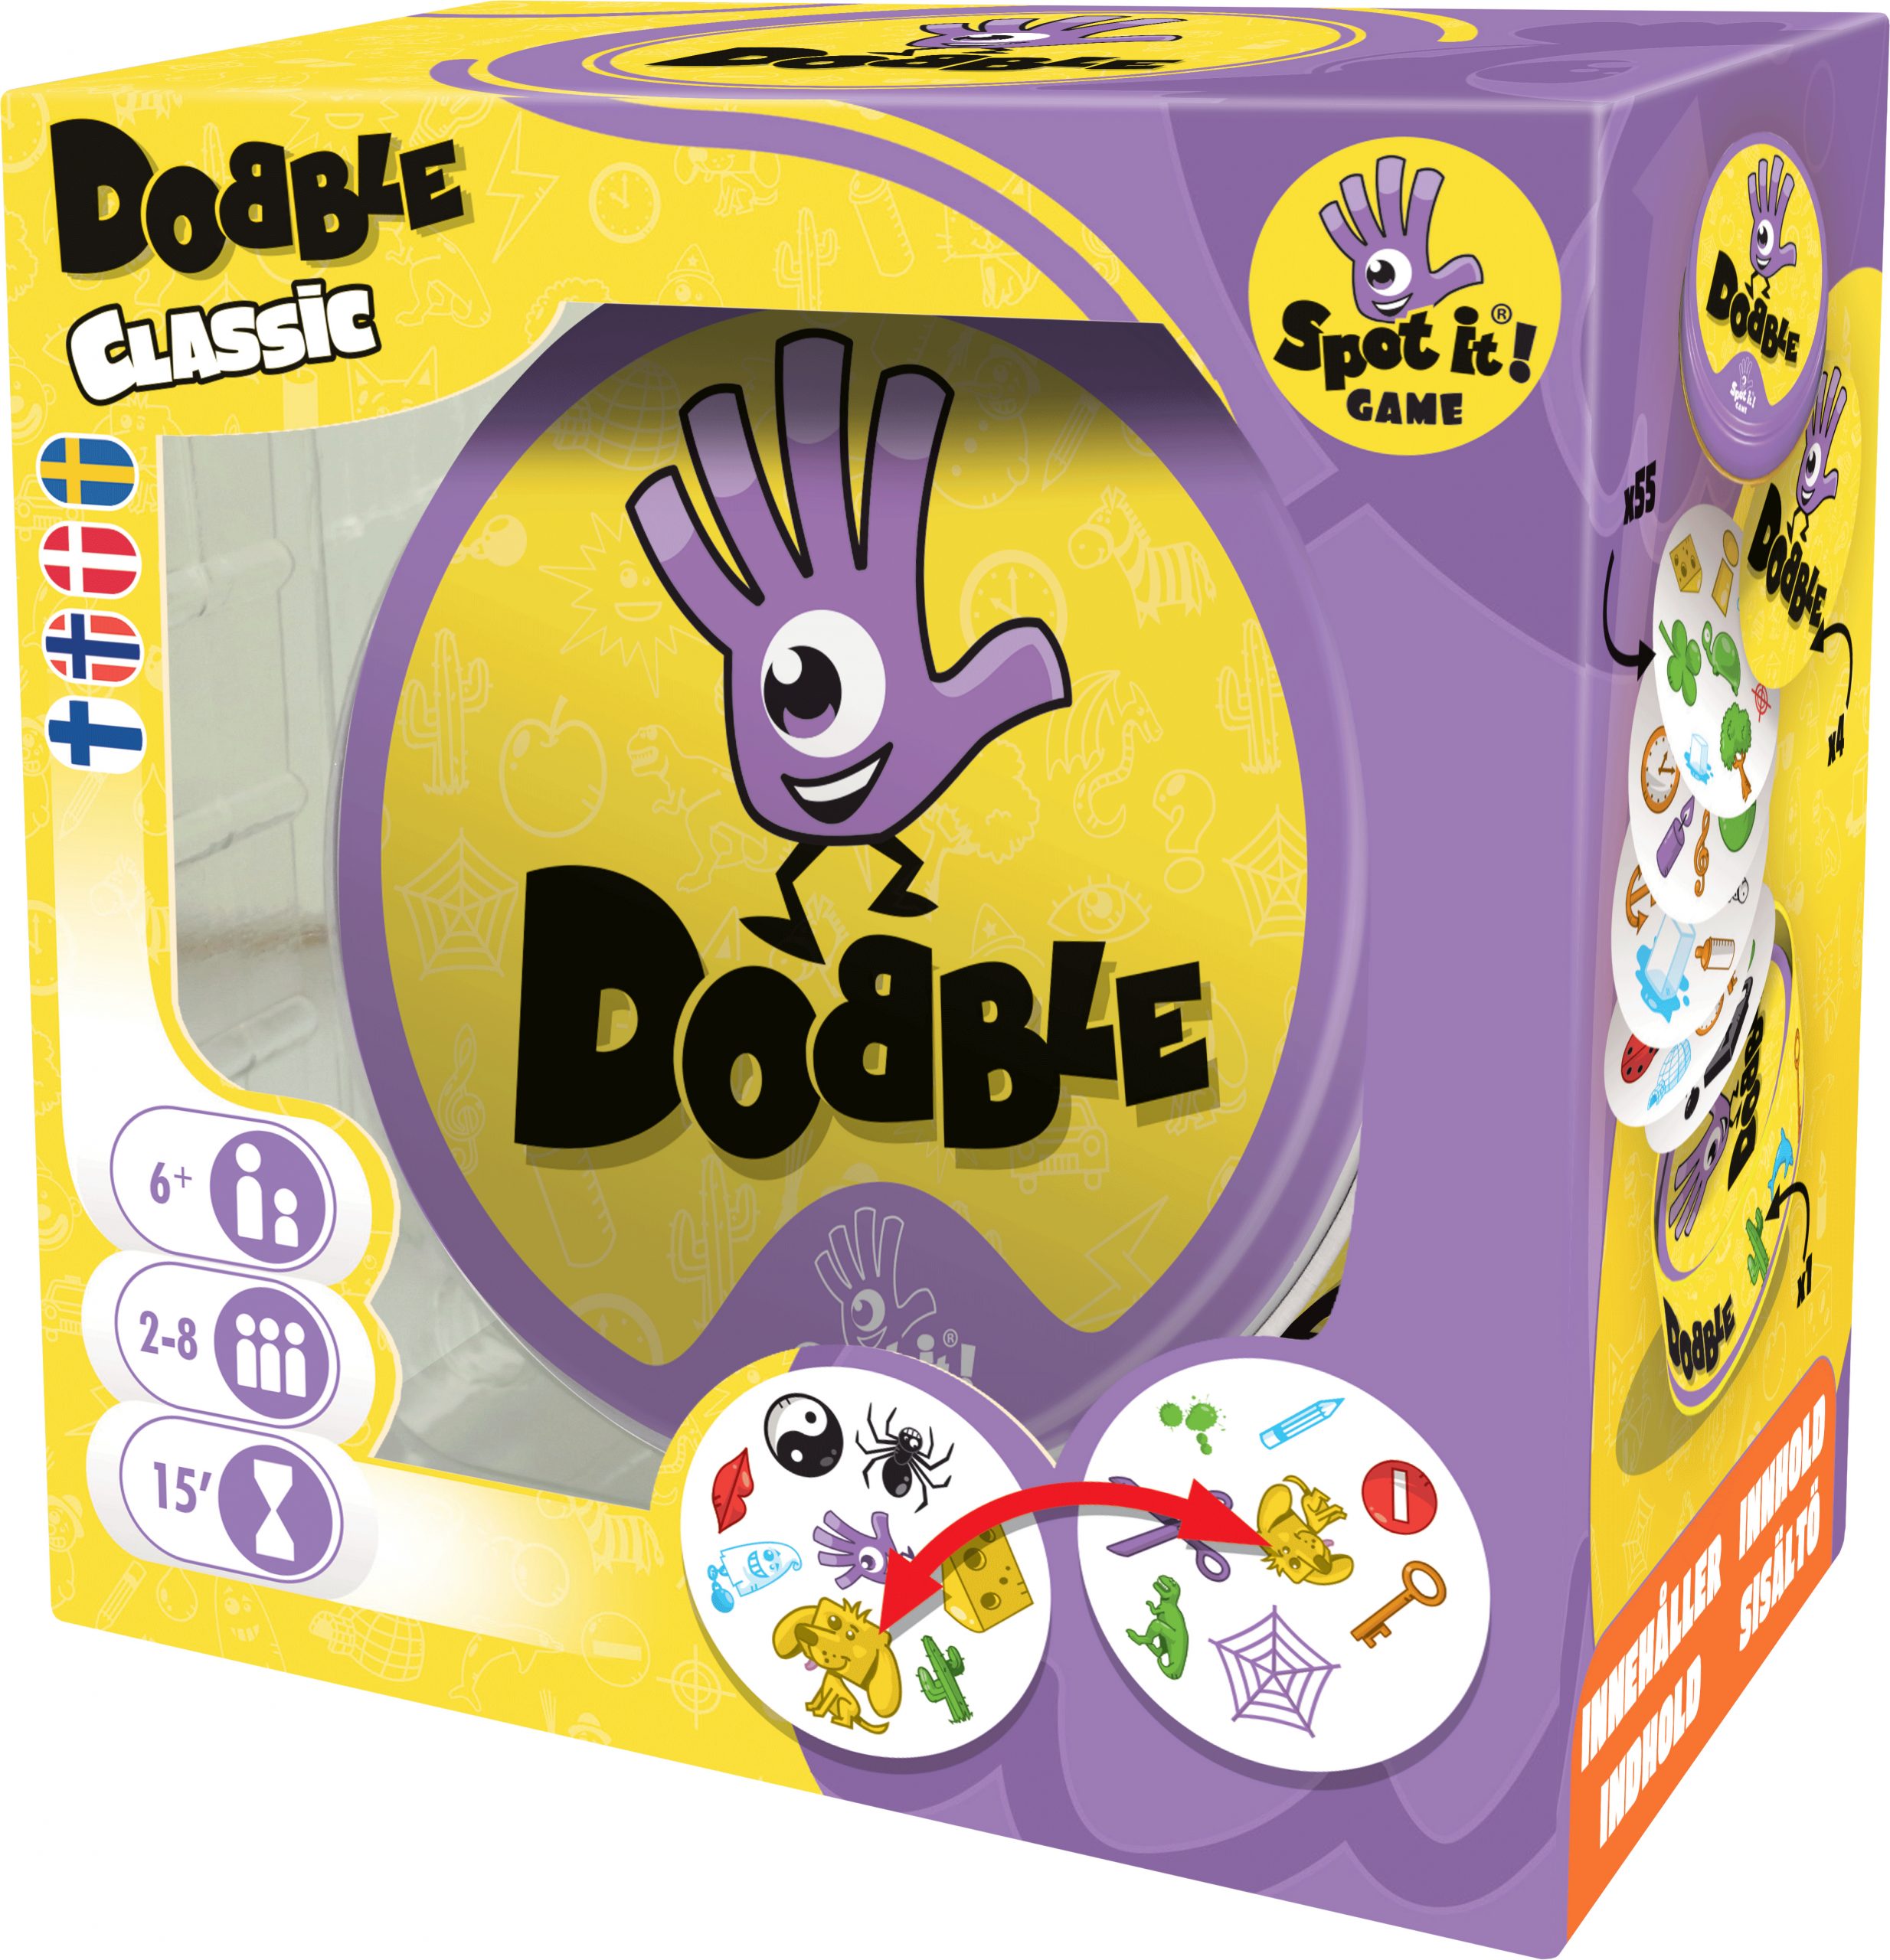 Asmodee expands Dobble line-up with Dobble Connect - Mojo Nation